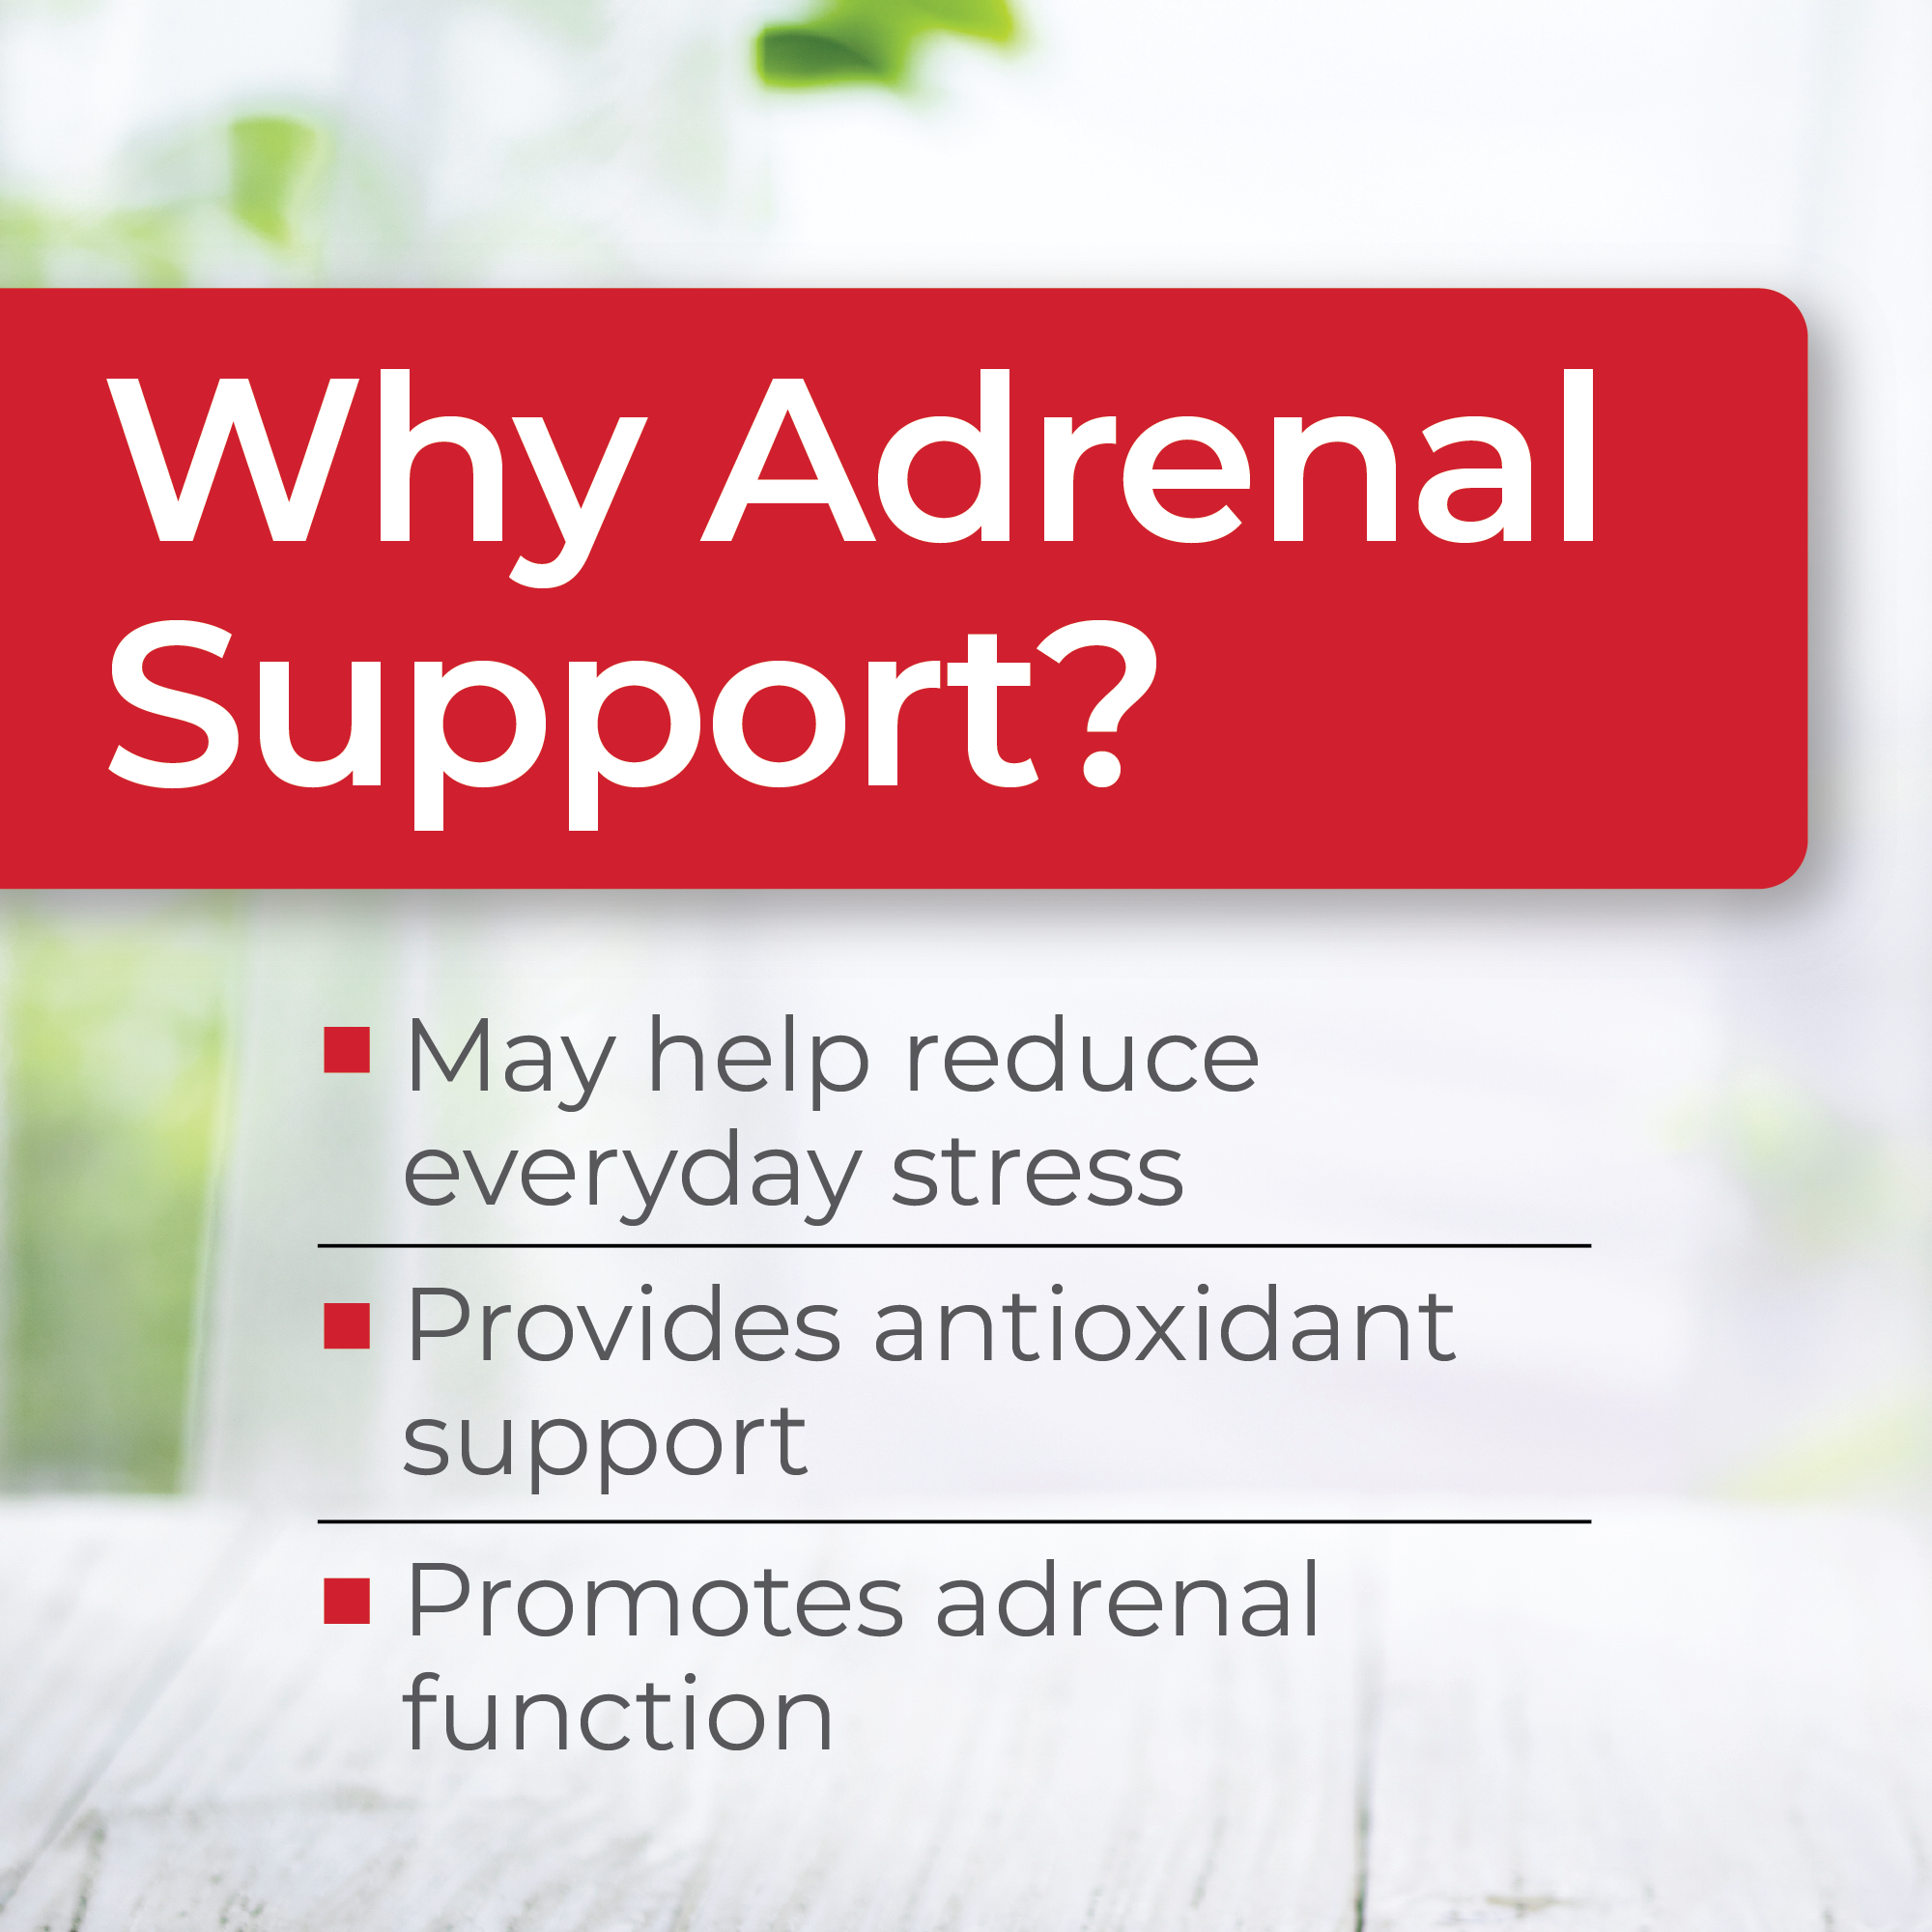 Adrenal Support™